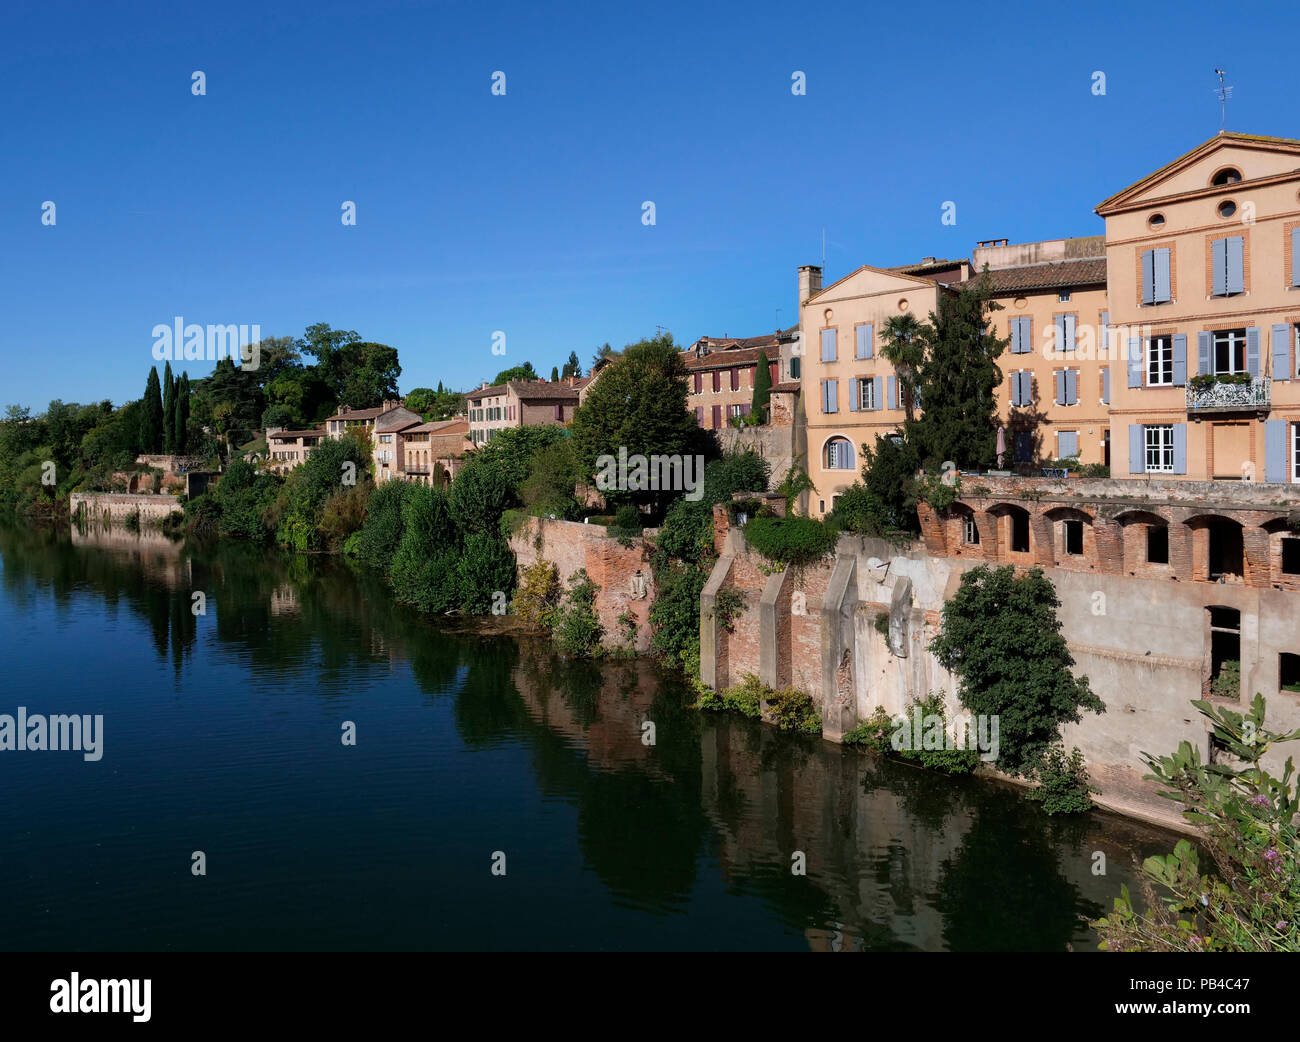 The city of Albi on the River Tarn near Toulouse, France, showing the Sainte-Cécile cathedral and the Pont Vieux in the city centre Stock Photo